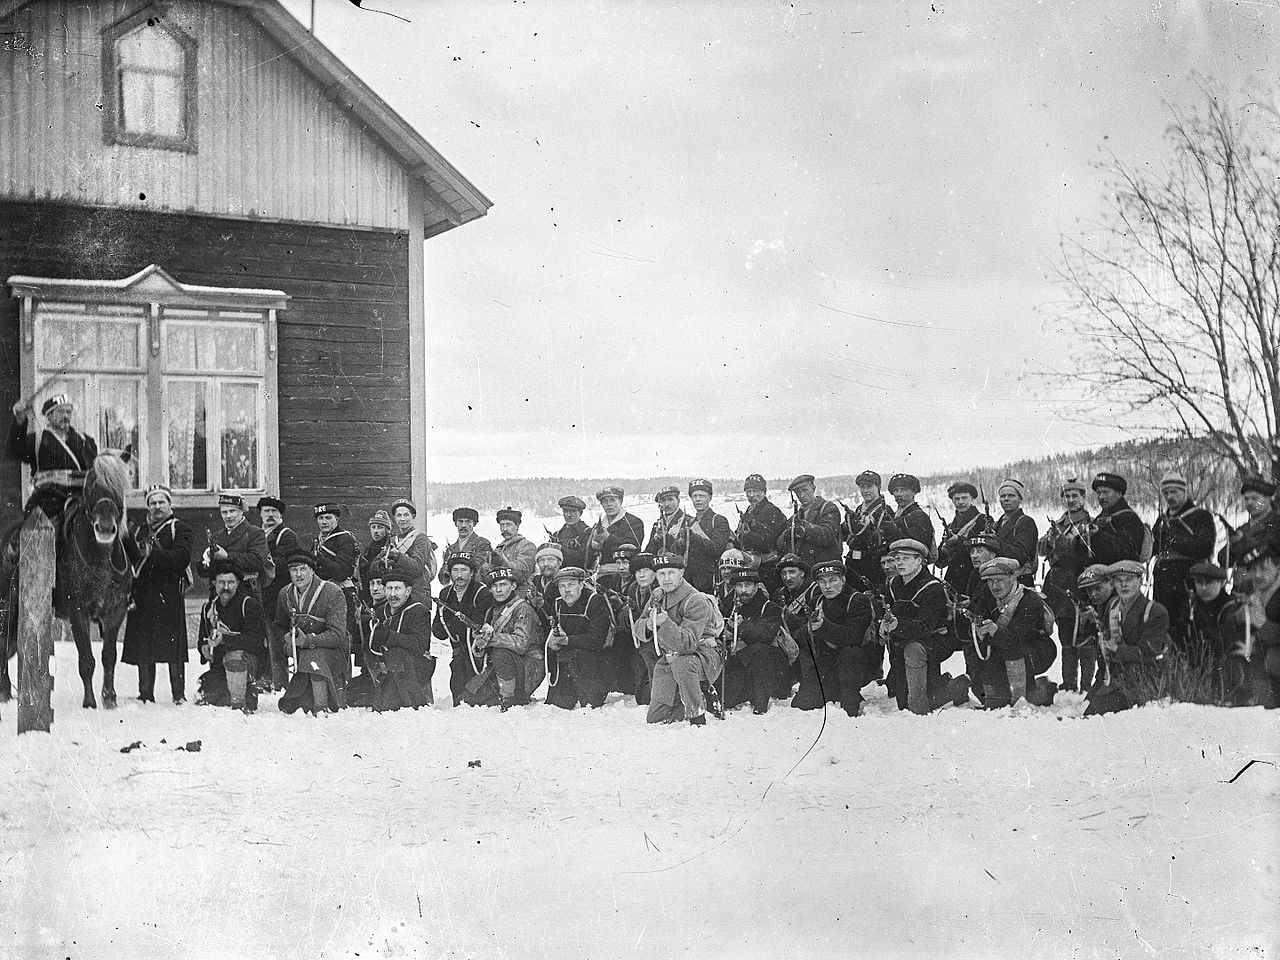 Tampereen Red Guard Image public domain